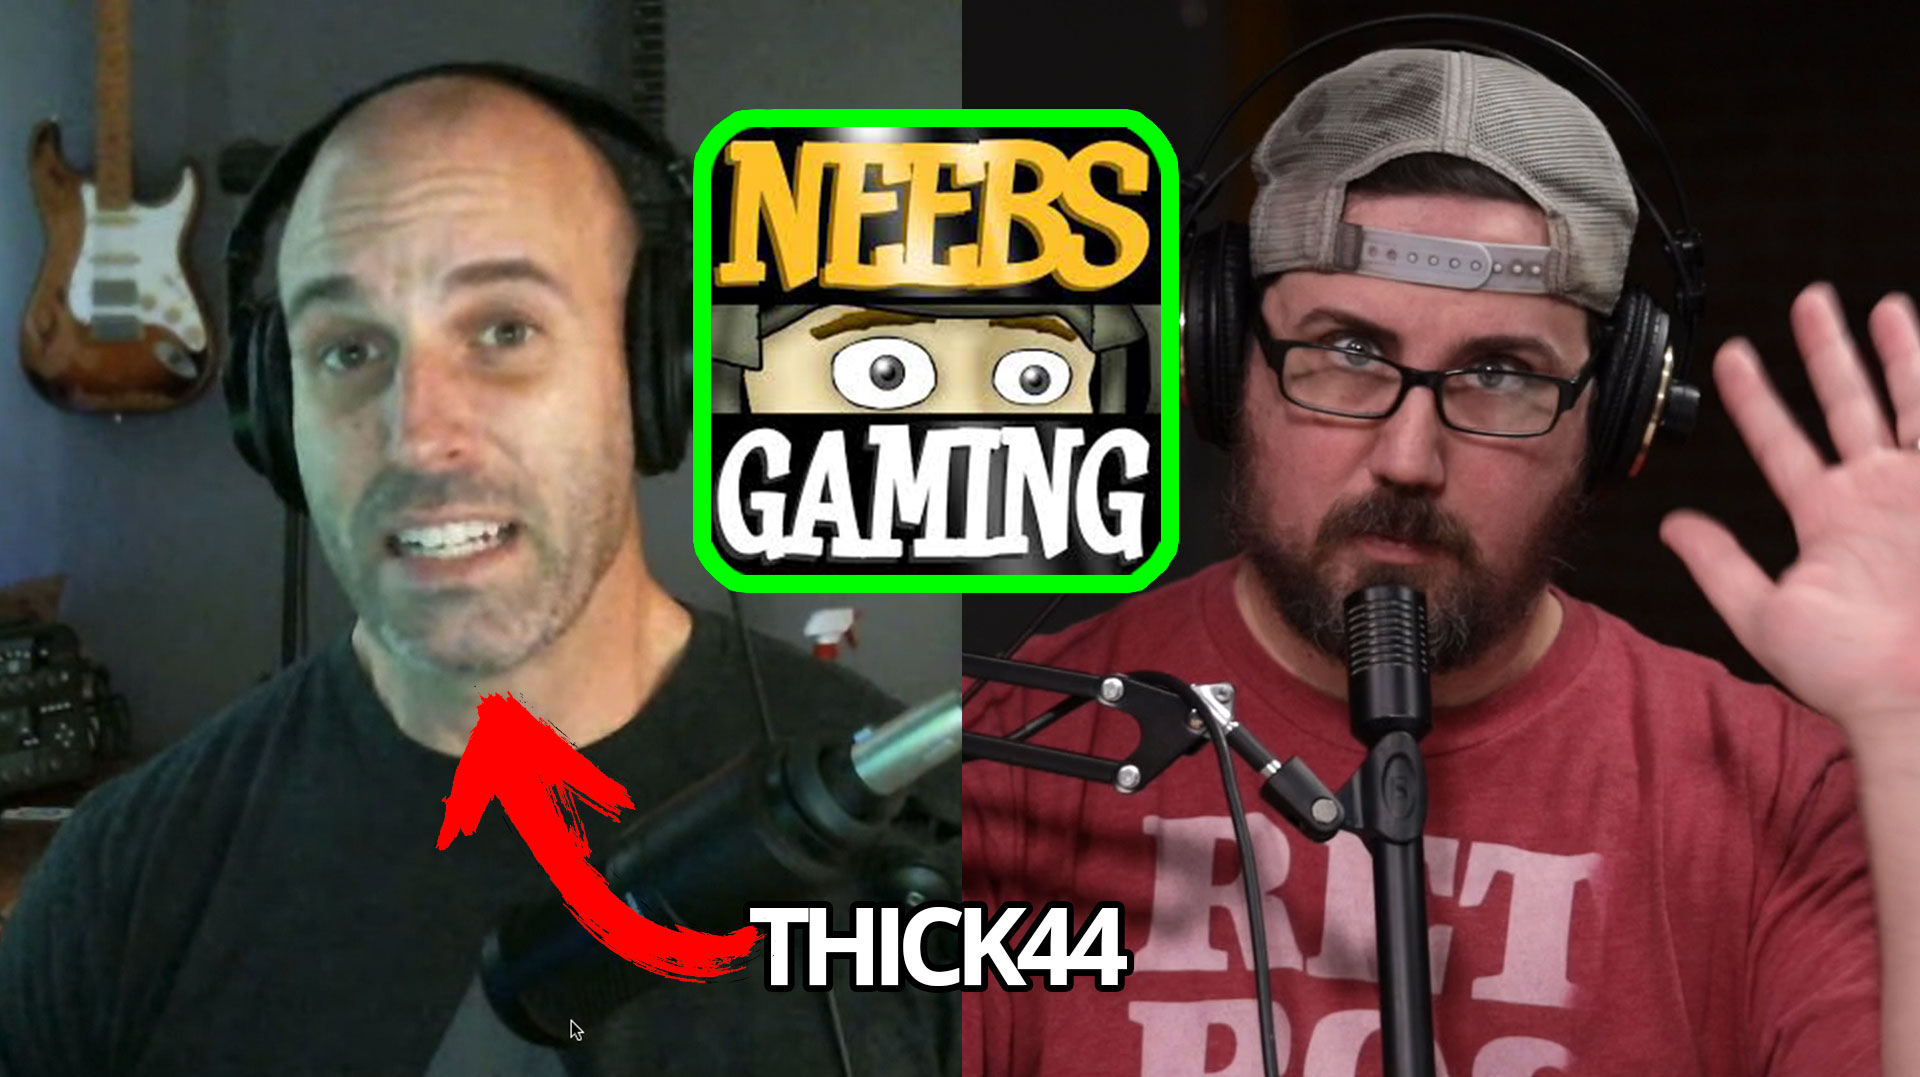 The Hackening The Story Behind The Hack Of Neebs Gaming From